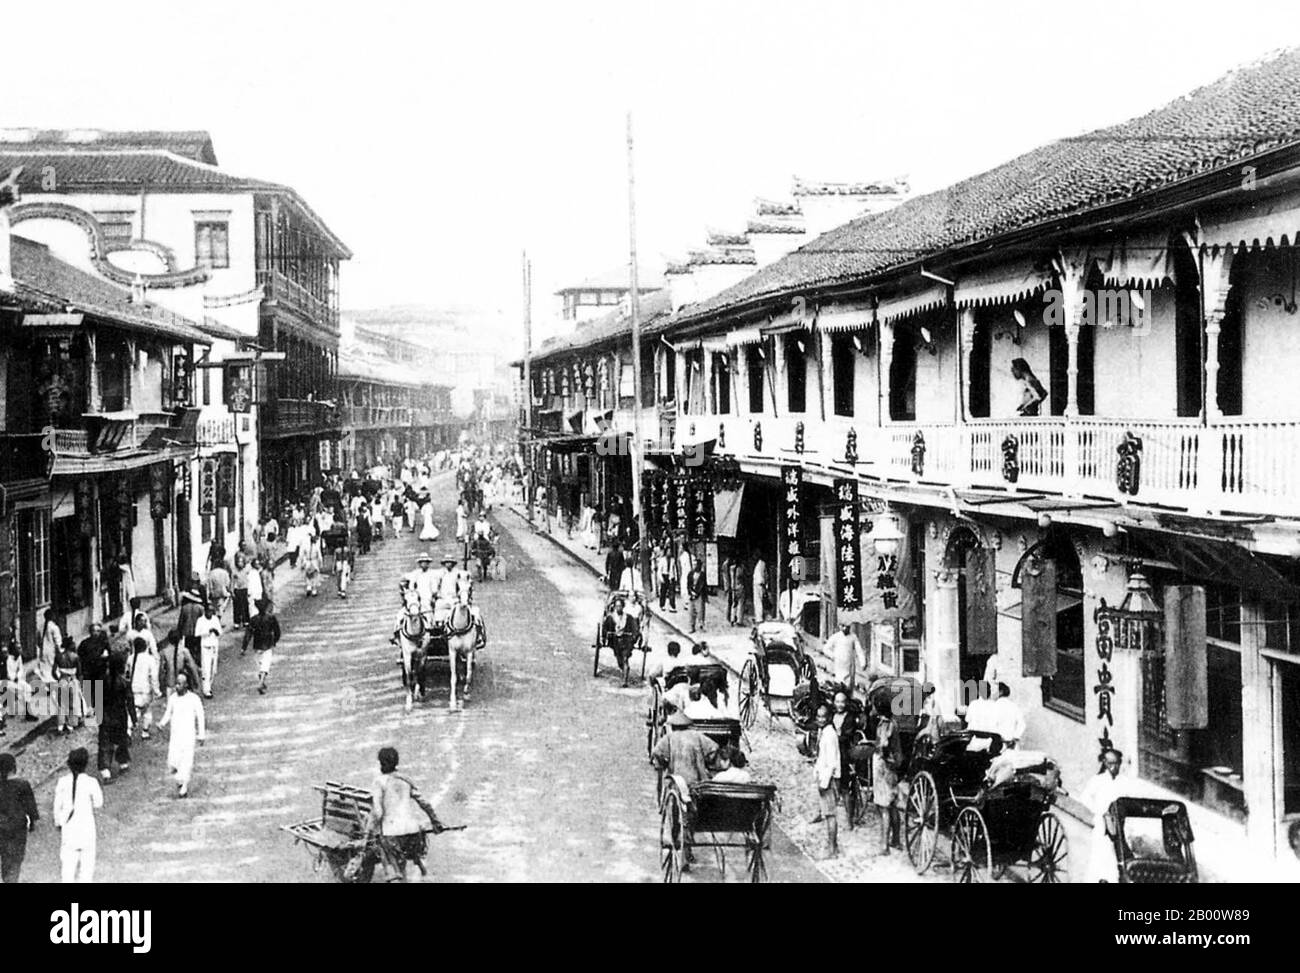 China: Horse and traps on Shanghai's Fuzhou Road, c. 1900.  International attention to Shanghai grew in the 19th century due to its economic and trade potential at the Yangtze River. During the First Opium War (1839–1842), British forces temporarily held the city. The war ended with the 1842 Treaty of Nanjing, opening Shanghai and other ports to international trade.  In 1863, the British settlement, located to the south of Suzhou creek (Huangpu district), and the American settlement, to the north of Suzhou creek (Hongkou district), joined in order to form the International Settlement. Stock Photo